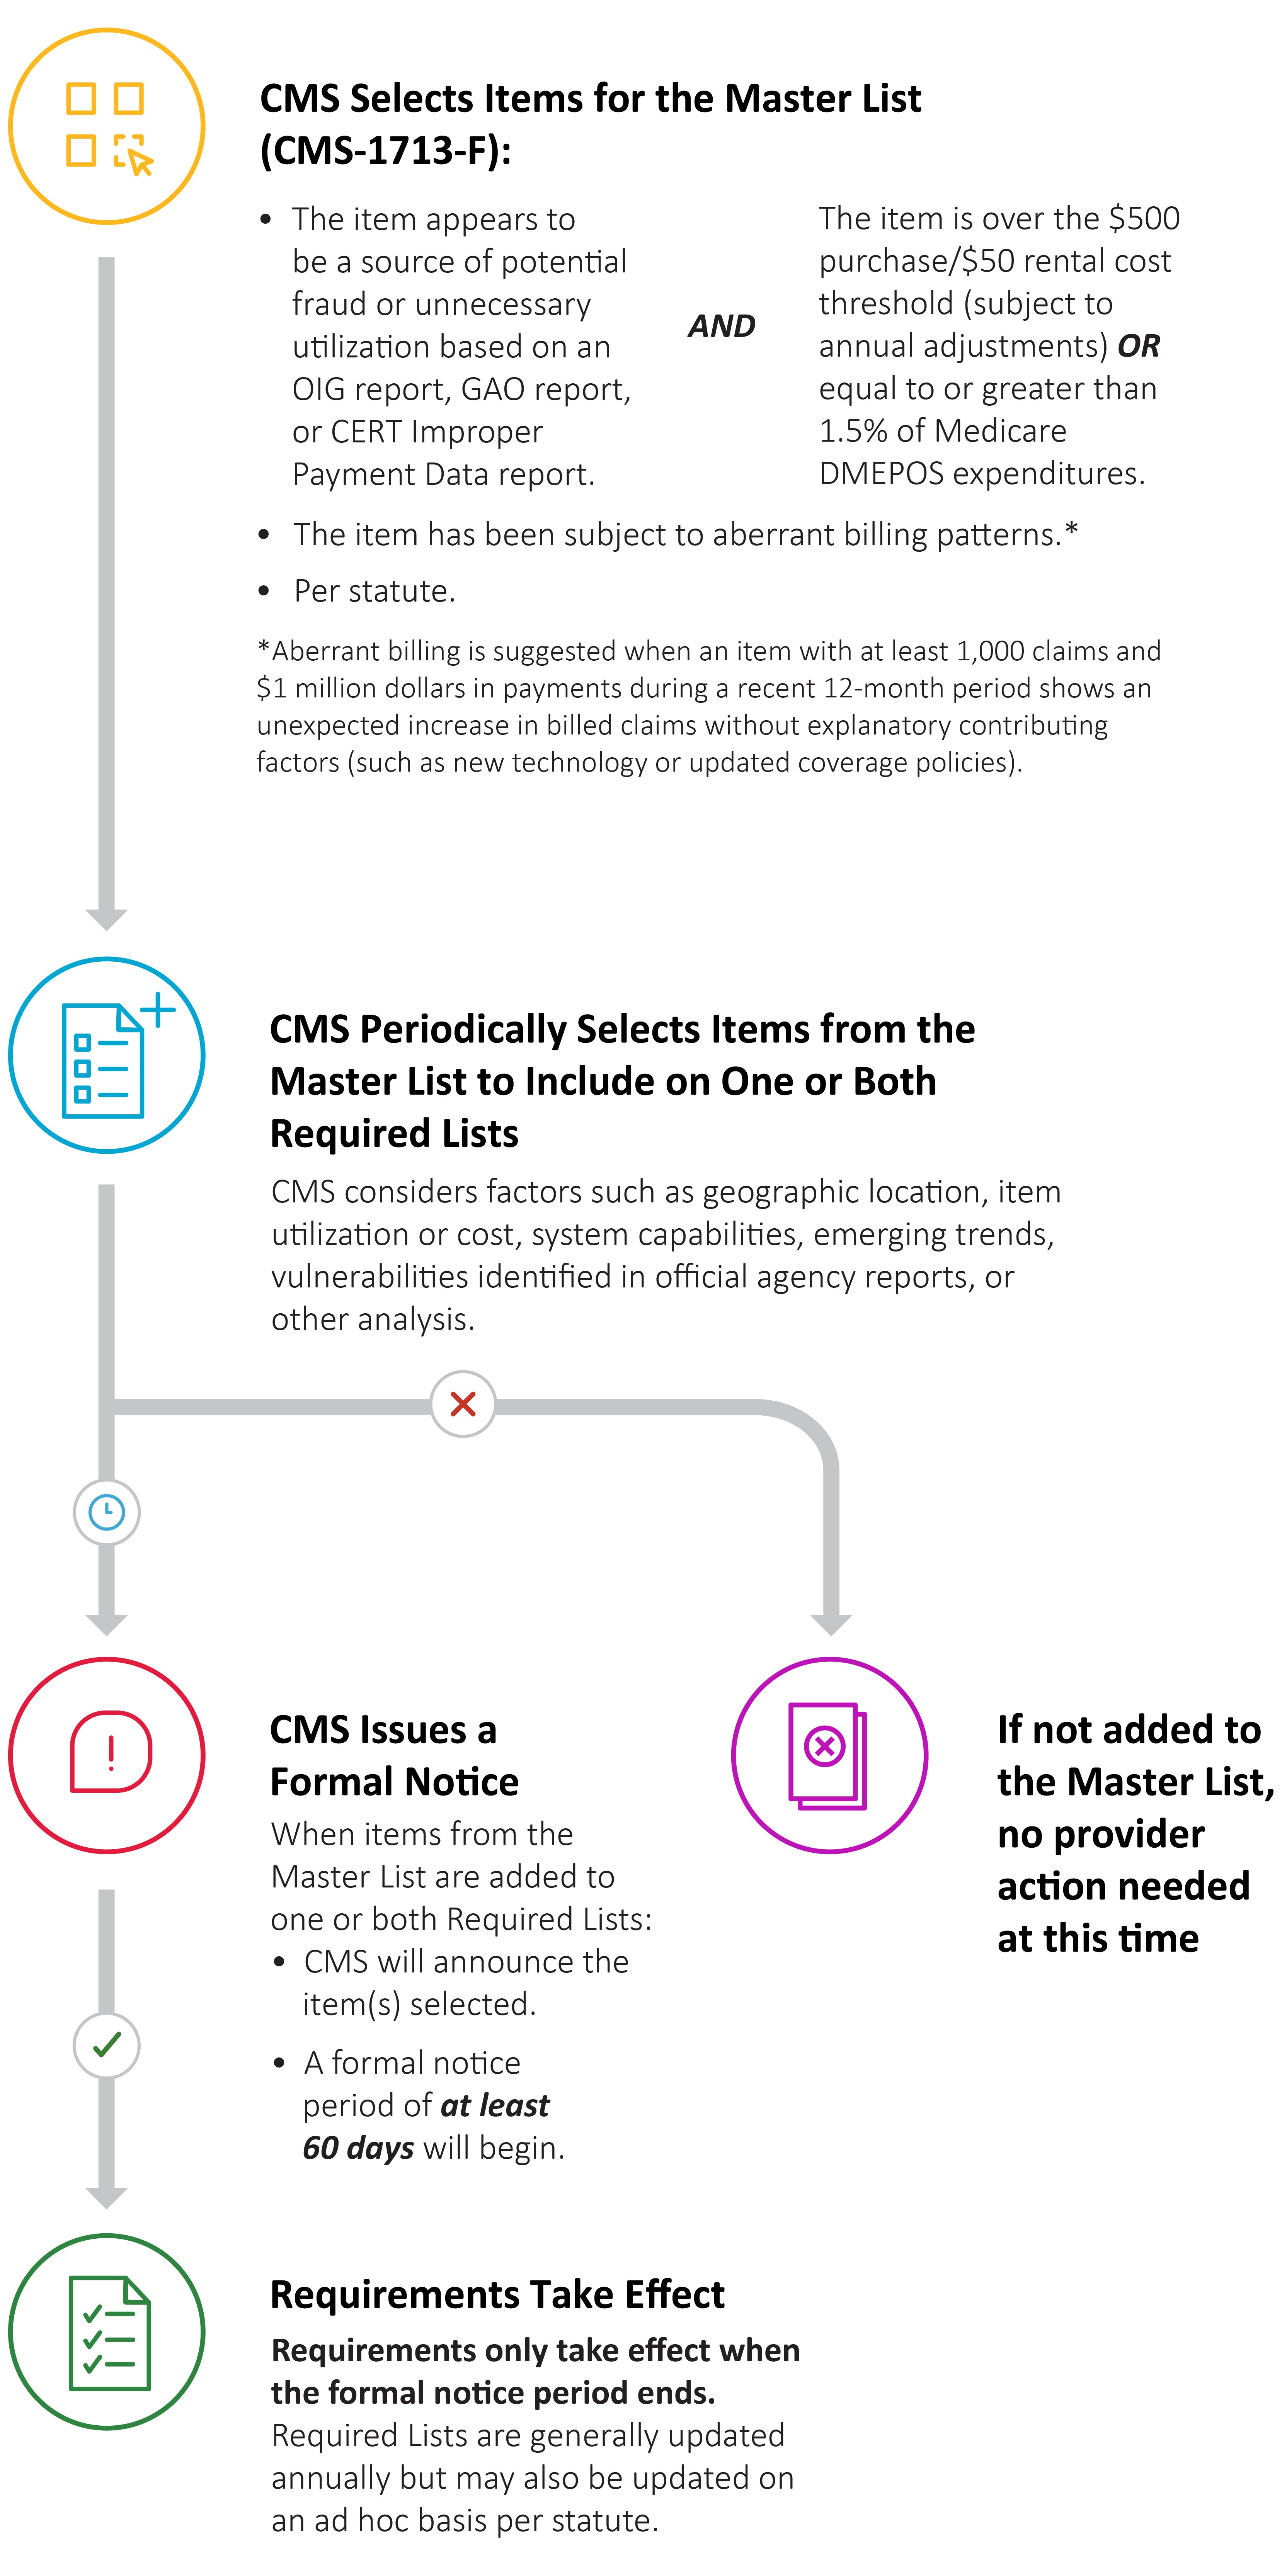 Step 1. CMS Selects Items for the Master List: Per statute (CMS-1713-F); The item appears to be a source of potential fraud or unnecessary utilization based on an OIG report, GAO report, or CERT Improper Payment Data report (and the item also meets the applicable cost threshold). The item has been subject to aberrant billing patterns. (Aberrant billing is suggested when an item with at least 1,000 claims and $1 million in payments during a recent 12-month period shows an unexpected increase in billed claims without explanatory contributing factors (such as new technology or updated coverage policies.) Step 2: CMS Periodically Selects Items from the Master List to Include on One or Both Required Lists: CMS considers factors such as geographic location, item utilization or cost, system capabilities, emerging trends, vulnerabilities identified in official agency reports, or other analysis. Step 3: CMS Issues a Formal Notice. When items from the Master List are added to one or both Required Lists: CMS will announce the item(s) selected and a formal notice period of at least 60 days will begin. Step 4: Requirements Take Effect: Requirements only take effect when the formal notice period ends. Required Lists are generally updated annually but may also be updated on an ad hoc basis per statute.